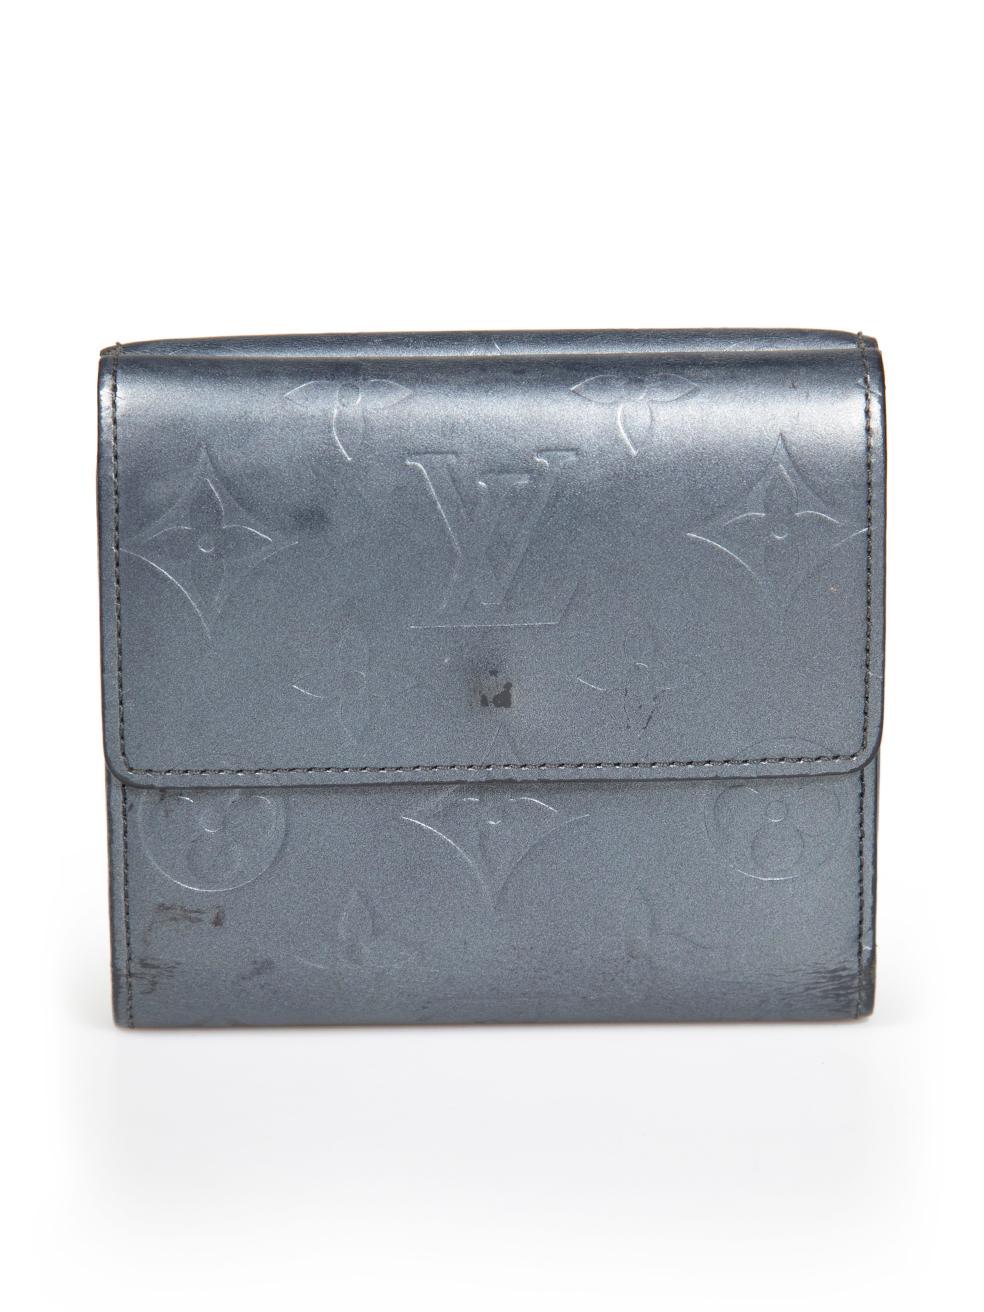 Louis Vuitton Navy Metallic Leather Monogram Vernis Elise Wallet In Good Condition For Sale In London, GB